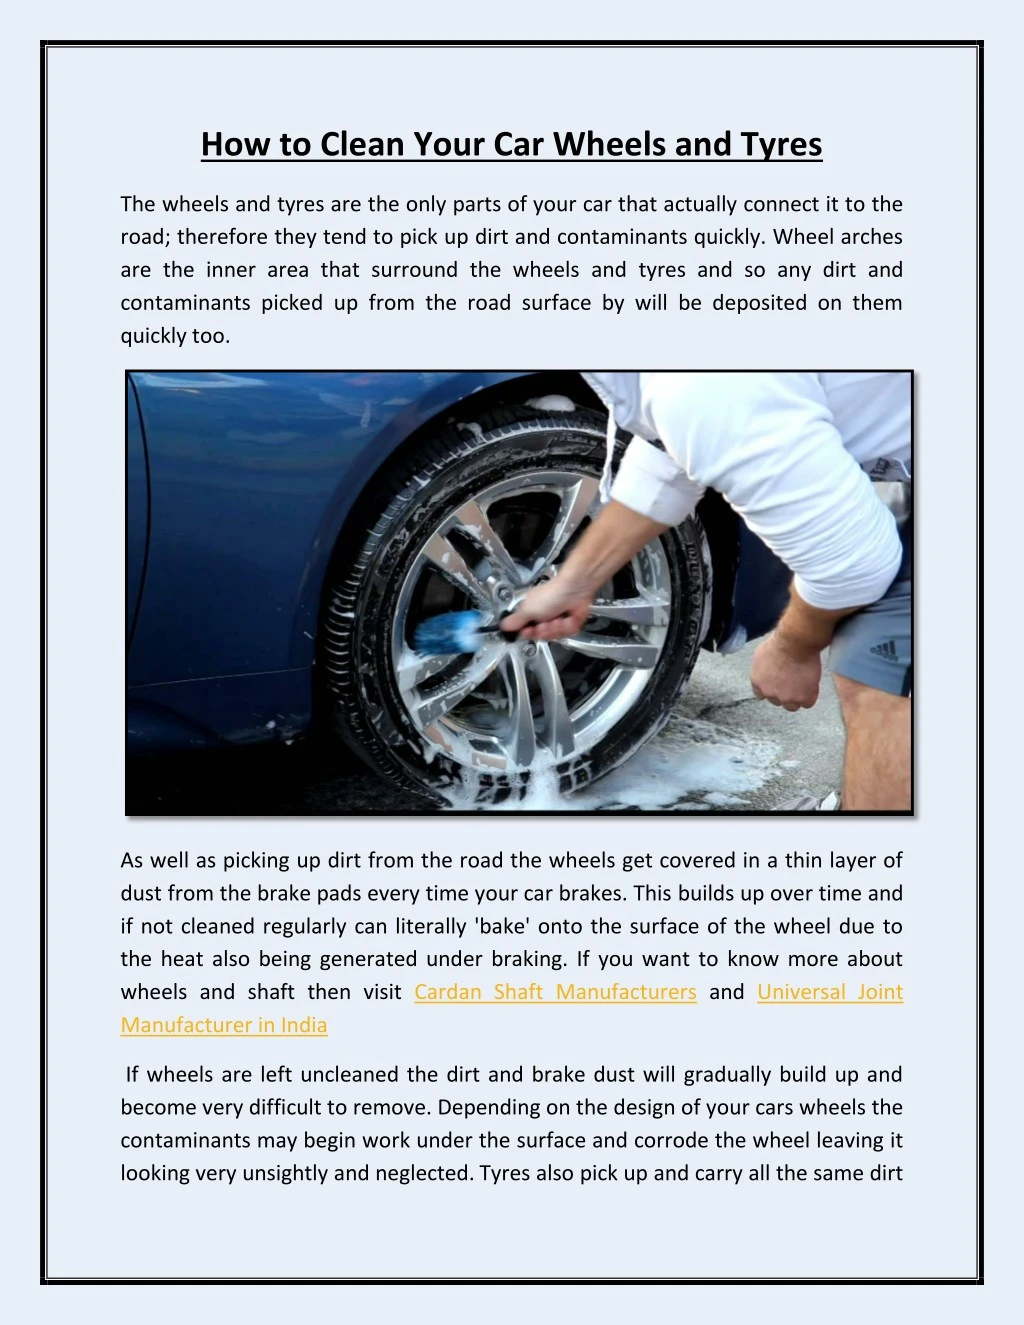 how to clean your car wheels and tyres